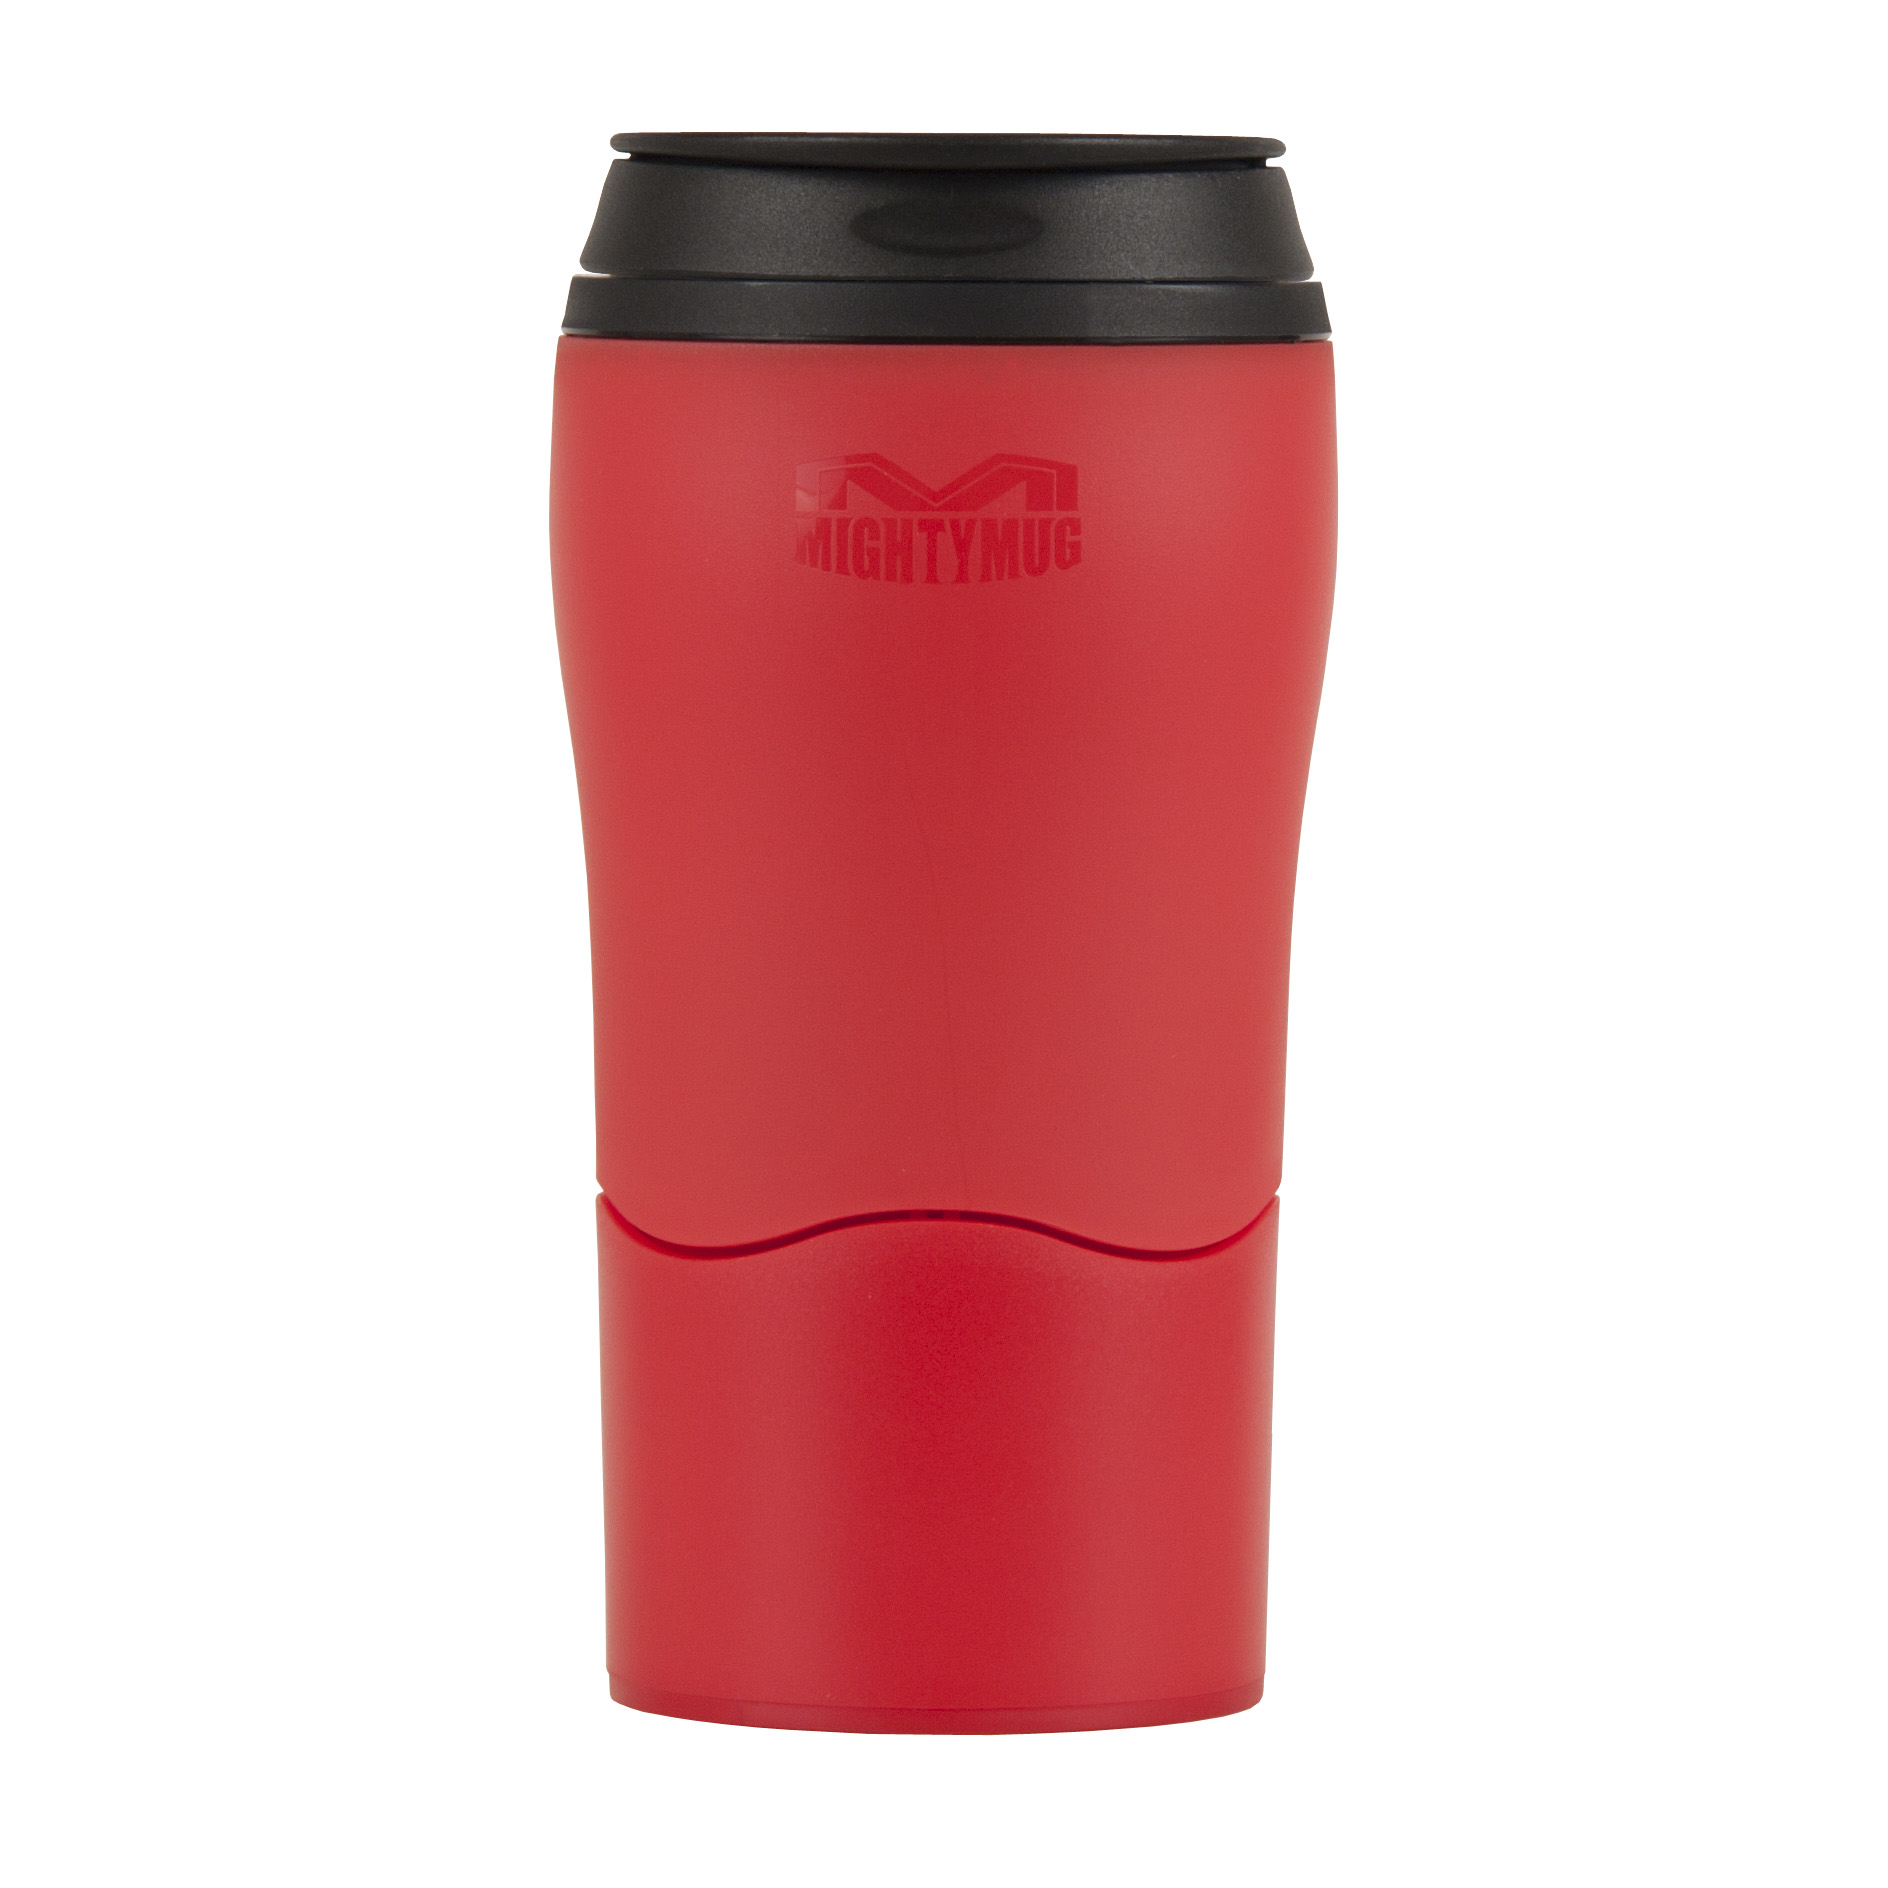 Mighty Mug Solo Travel Mug in red with black lid